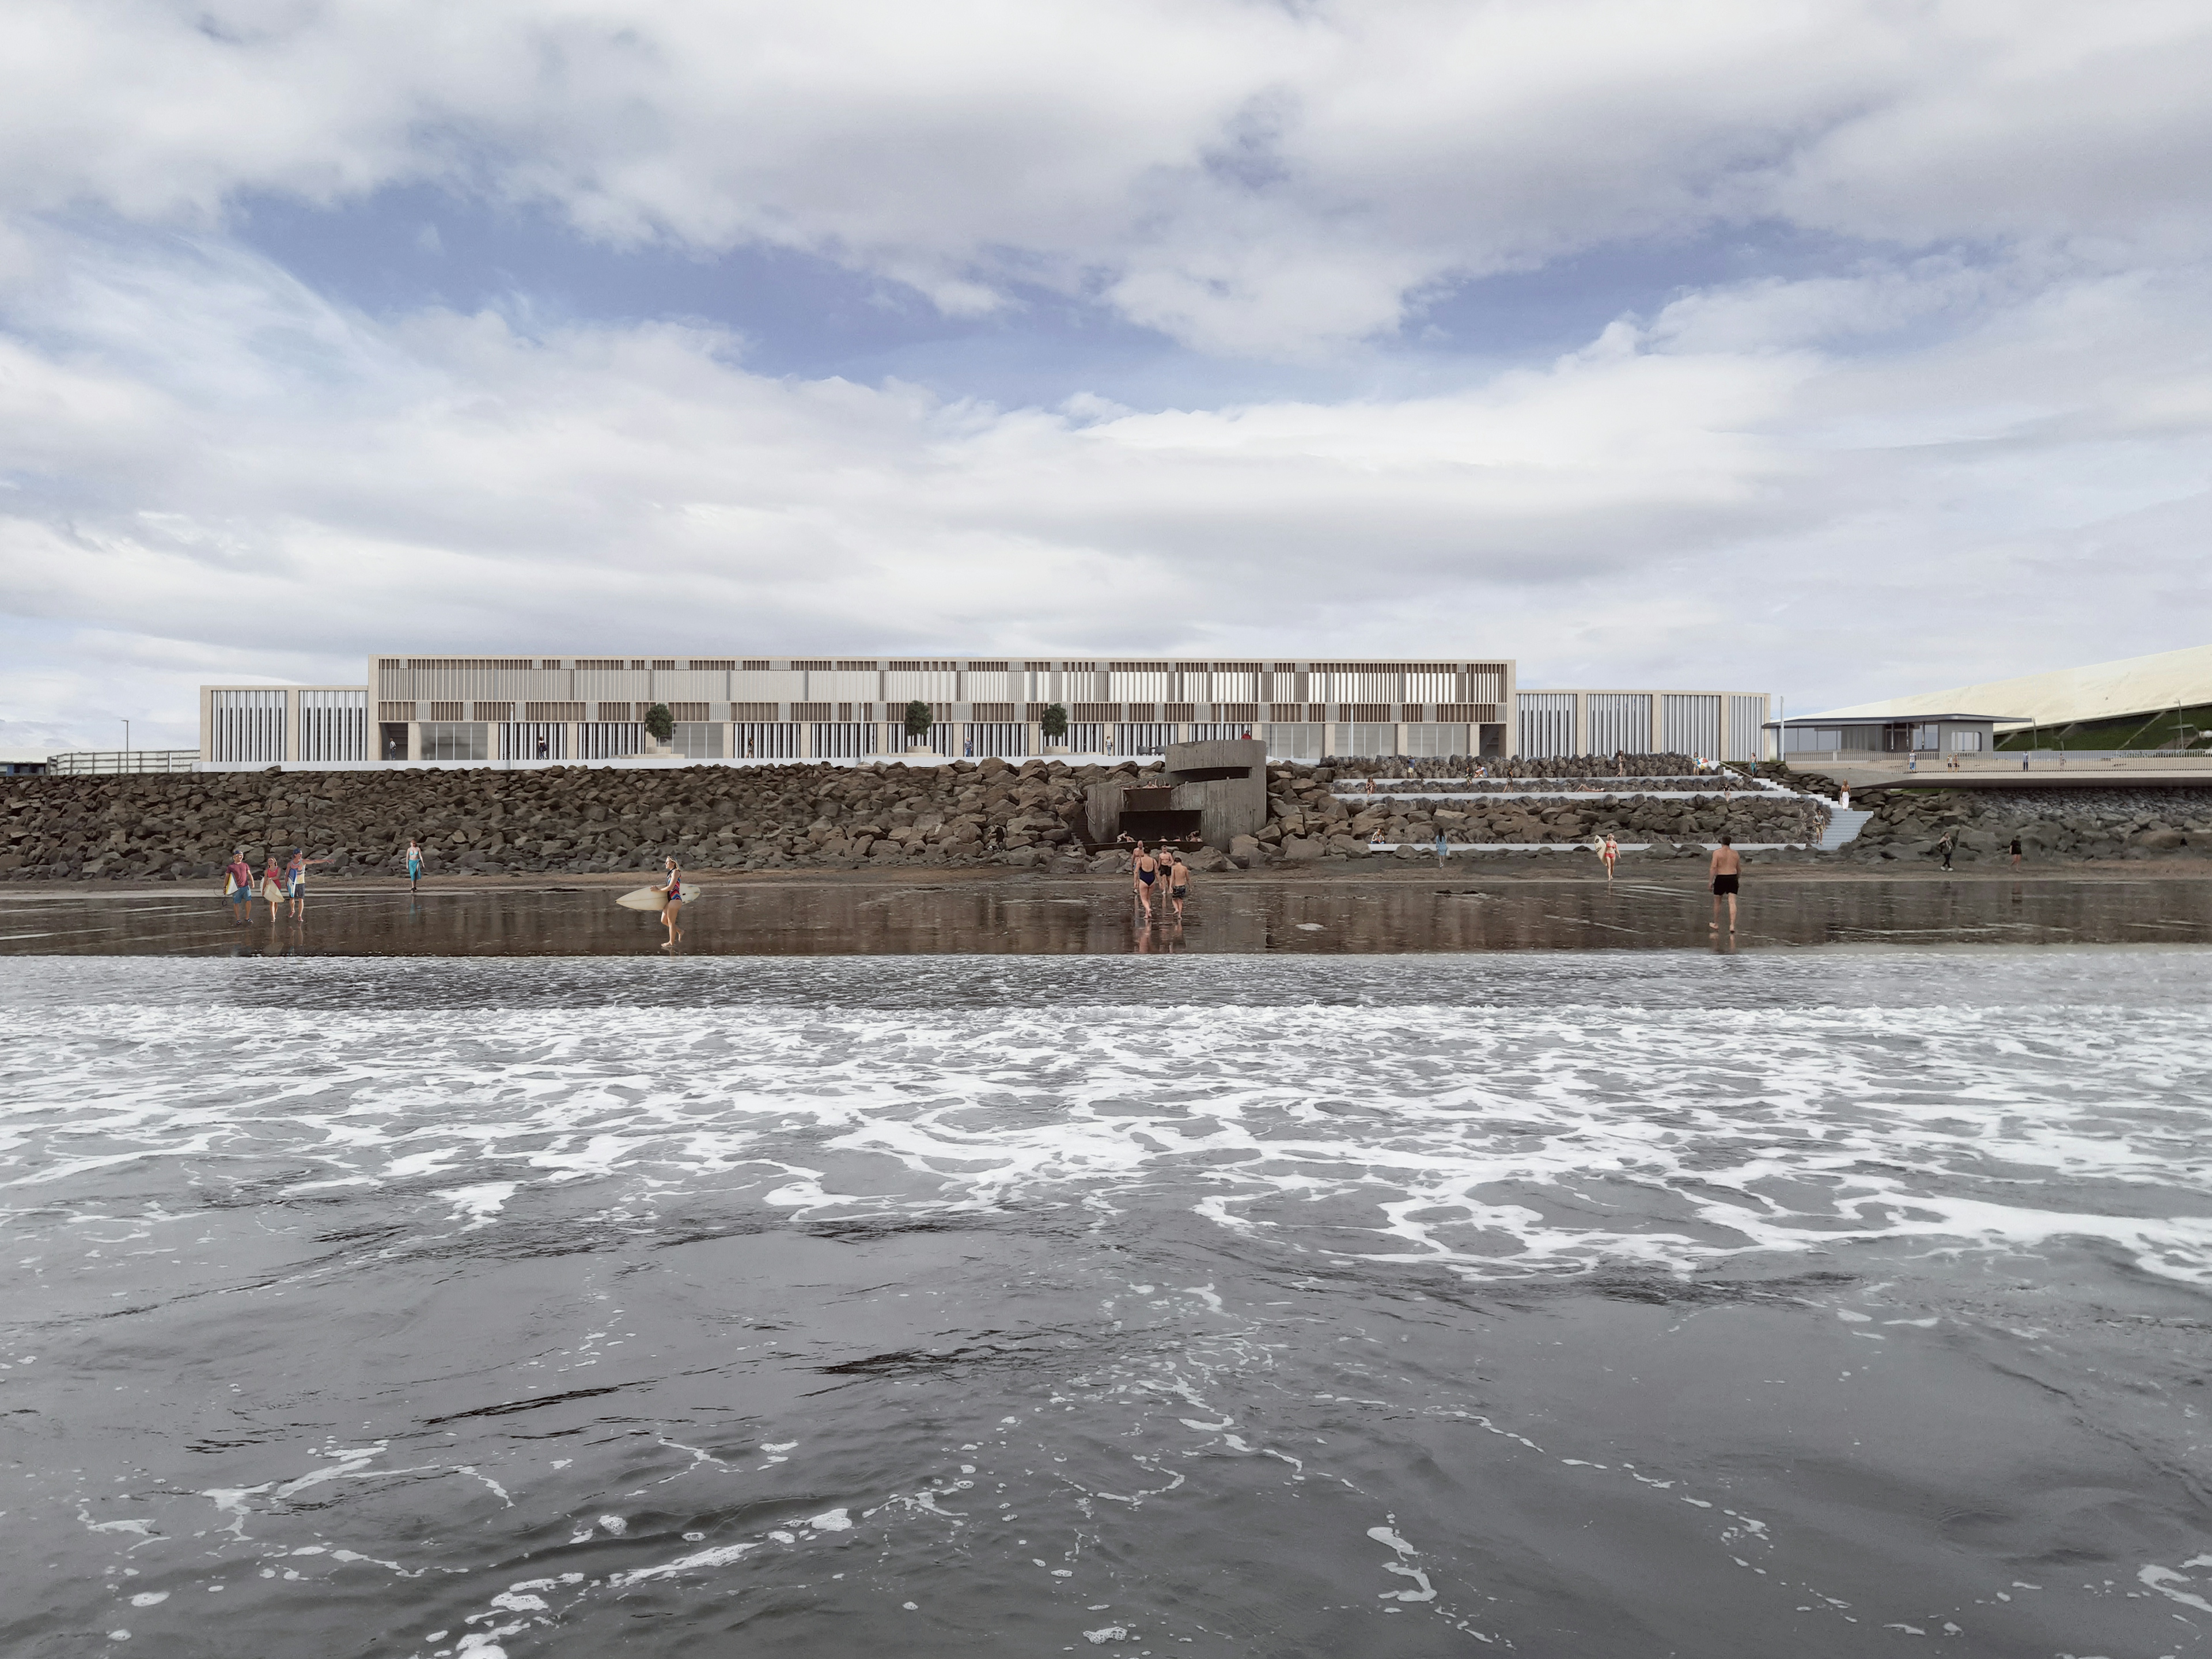 An inclusive, dynamic, attractive world-class destination for locals and visitors alike. Series of interventions cater to all abilities, interests & neurodiversities. Langisandur waterfront/Akranes 1st prize/2021-ongoing